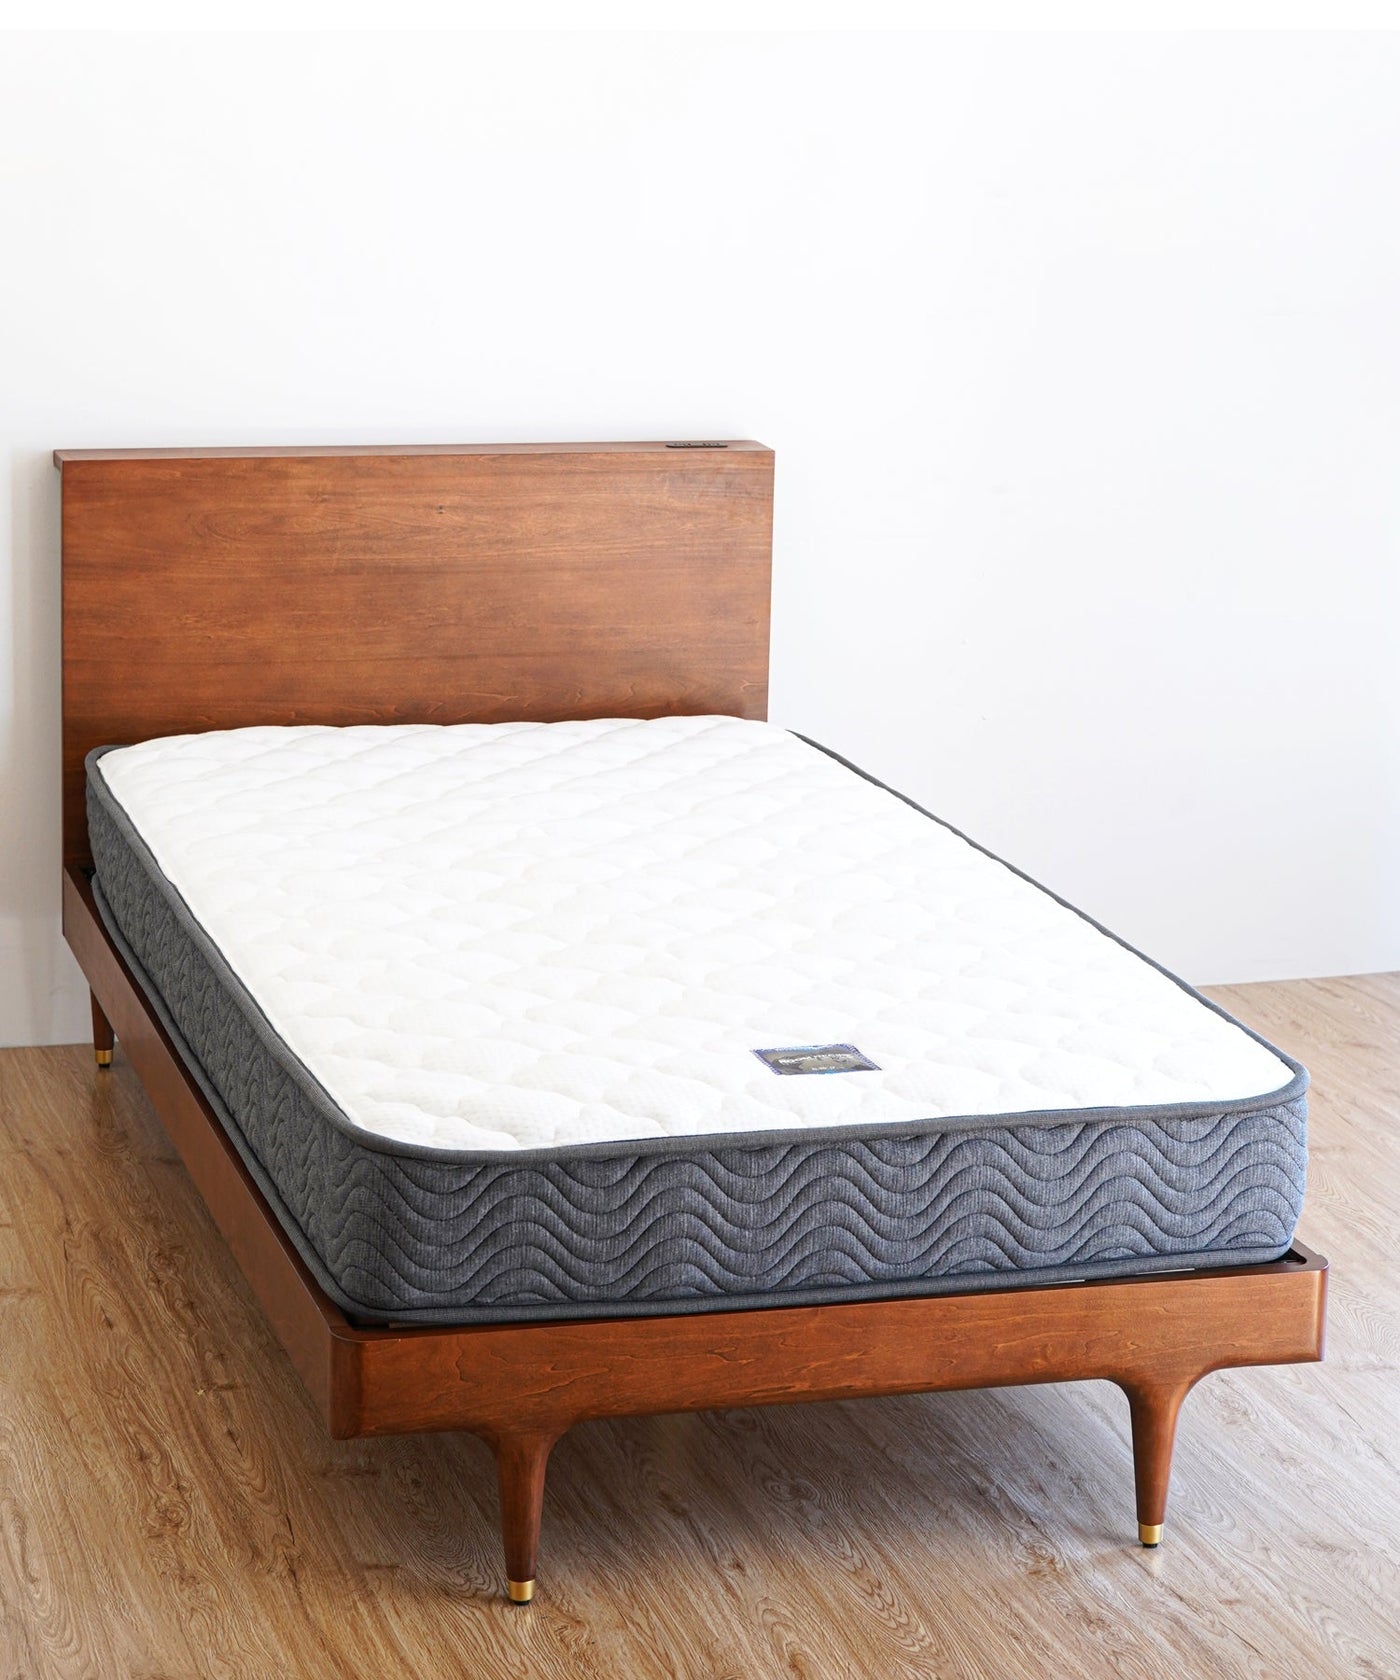 JULIE ARCH DOUBLE BED FRAME ジュリーアーチ ダブルベッド フレーム 